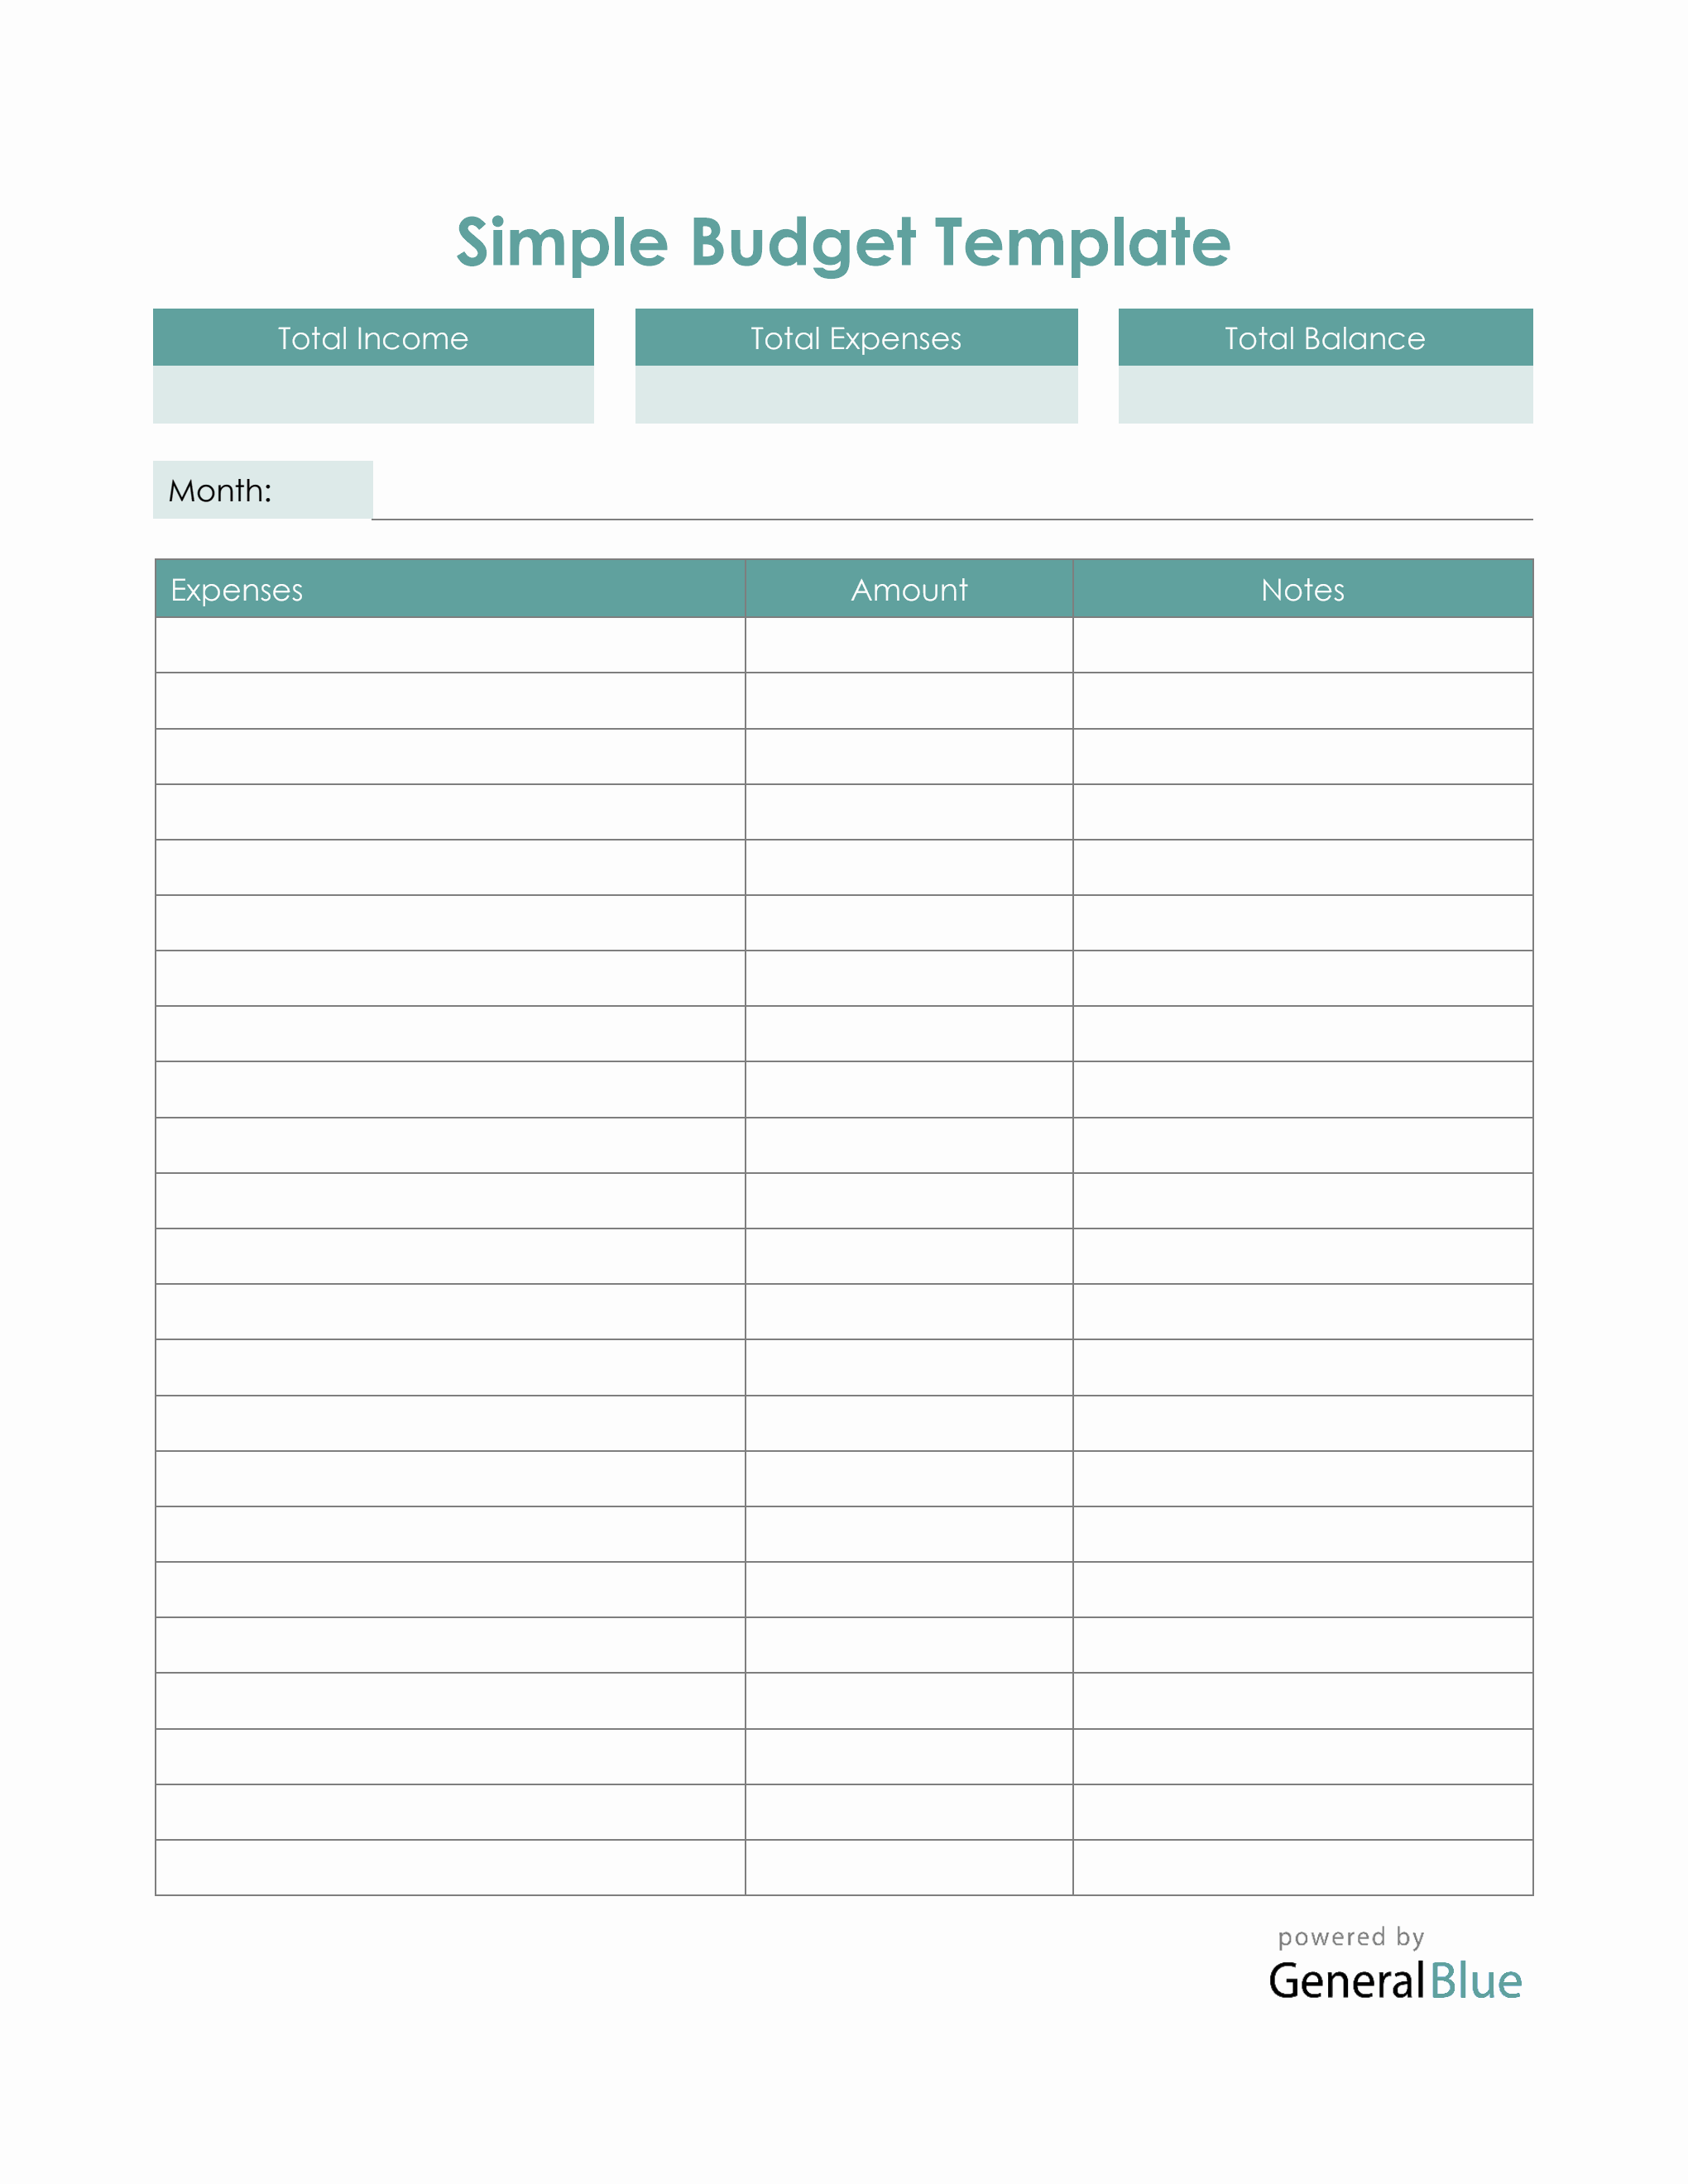 simple-budget-template-in-word